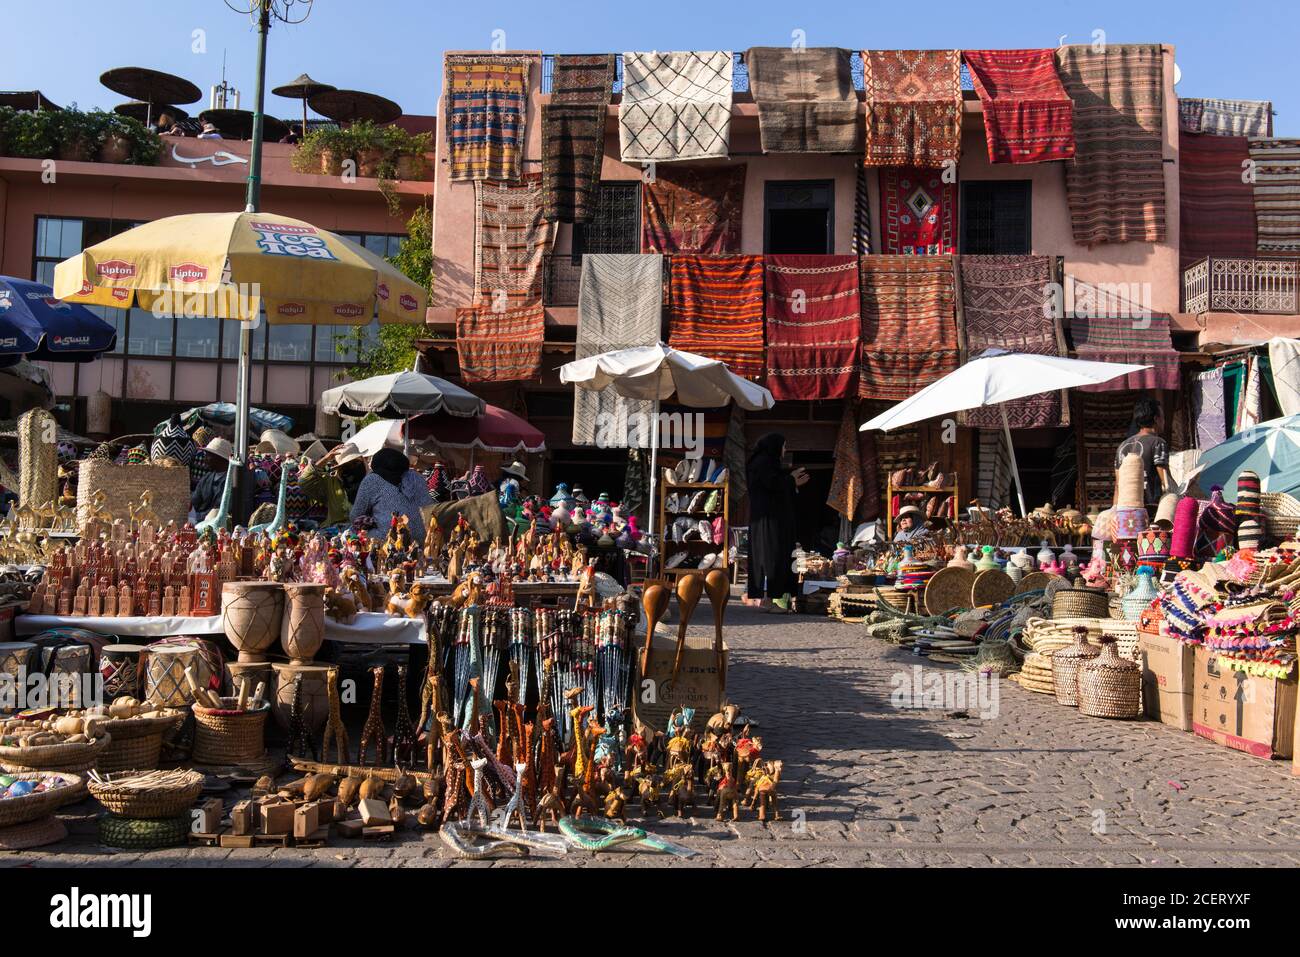 Carpet shop and market stalls in souk  inside the Medina, the old wall city, Marrakesh. Stock Photo